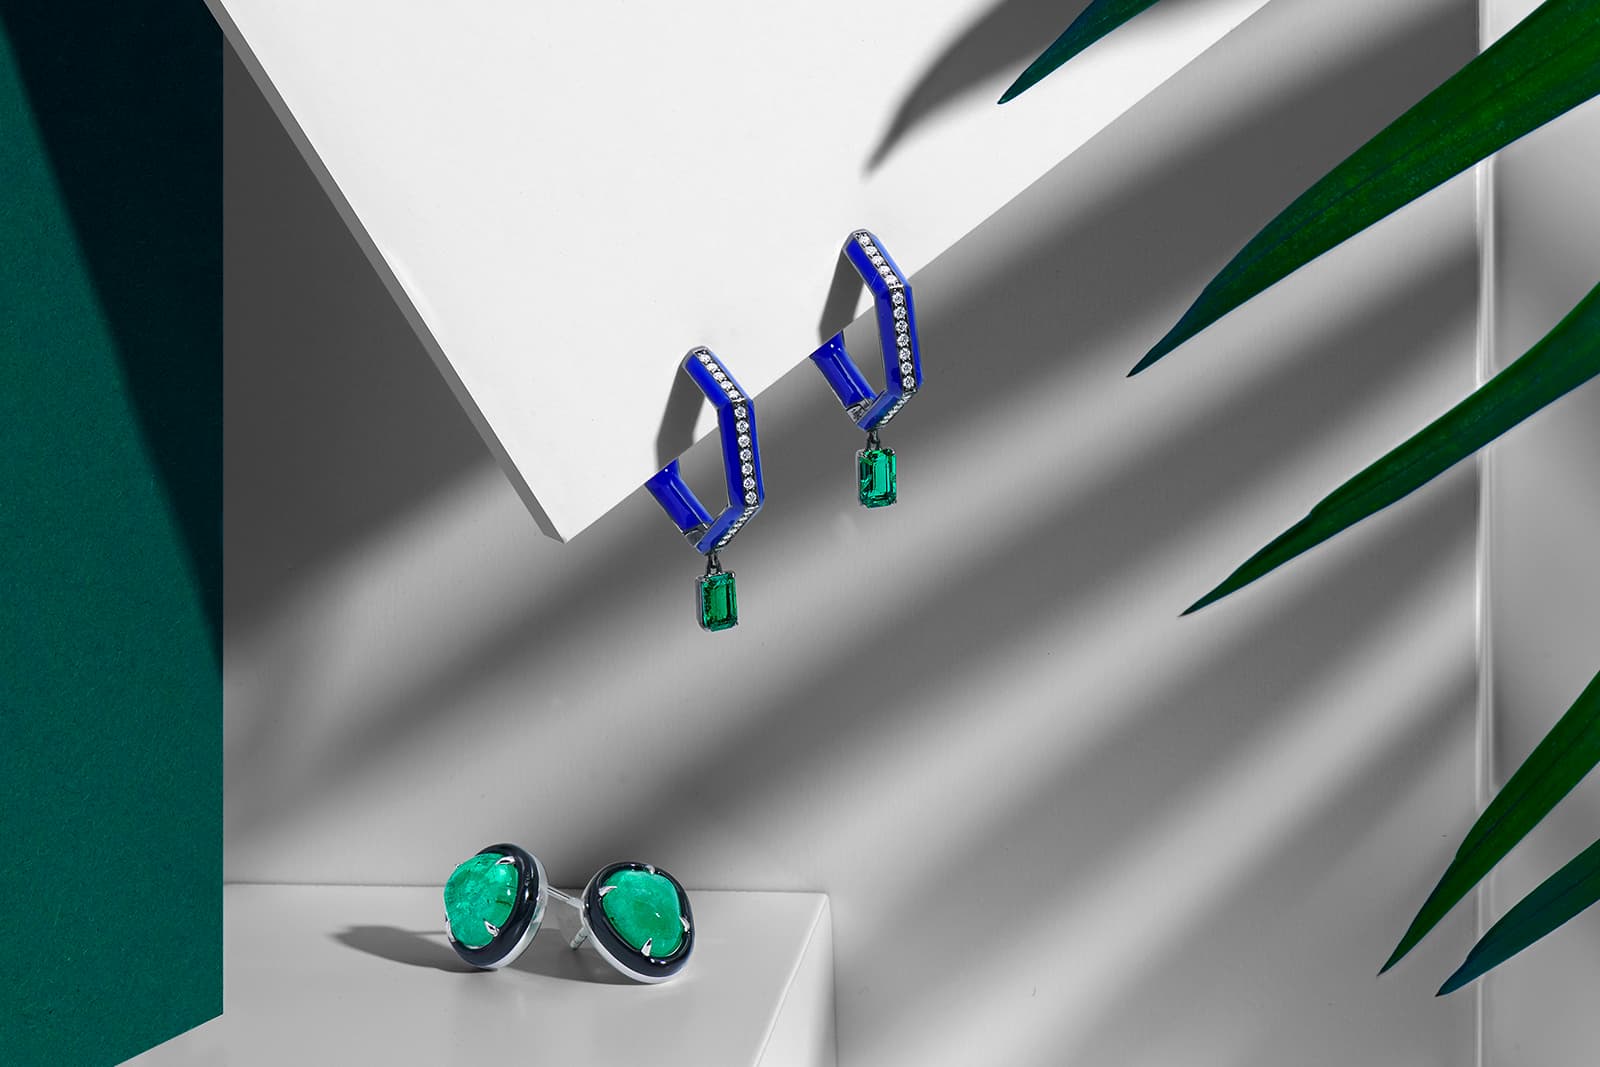 Two Muzo emerald pieces by Katherine Jetter as part of the collaboration, including the Limited Edition drop hoop earrings and the Black Enamel studs with tumbled Muzo emeralds totalling 7.88 carats